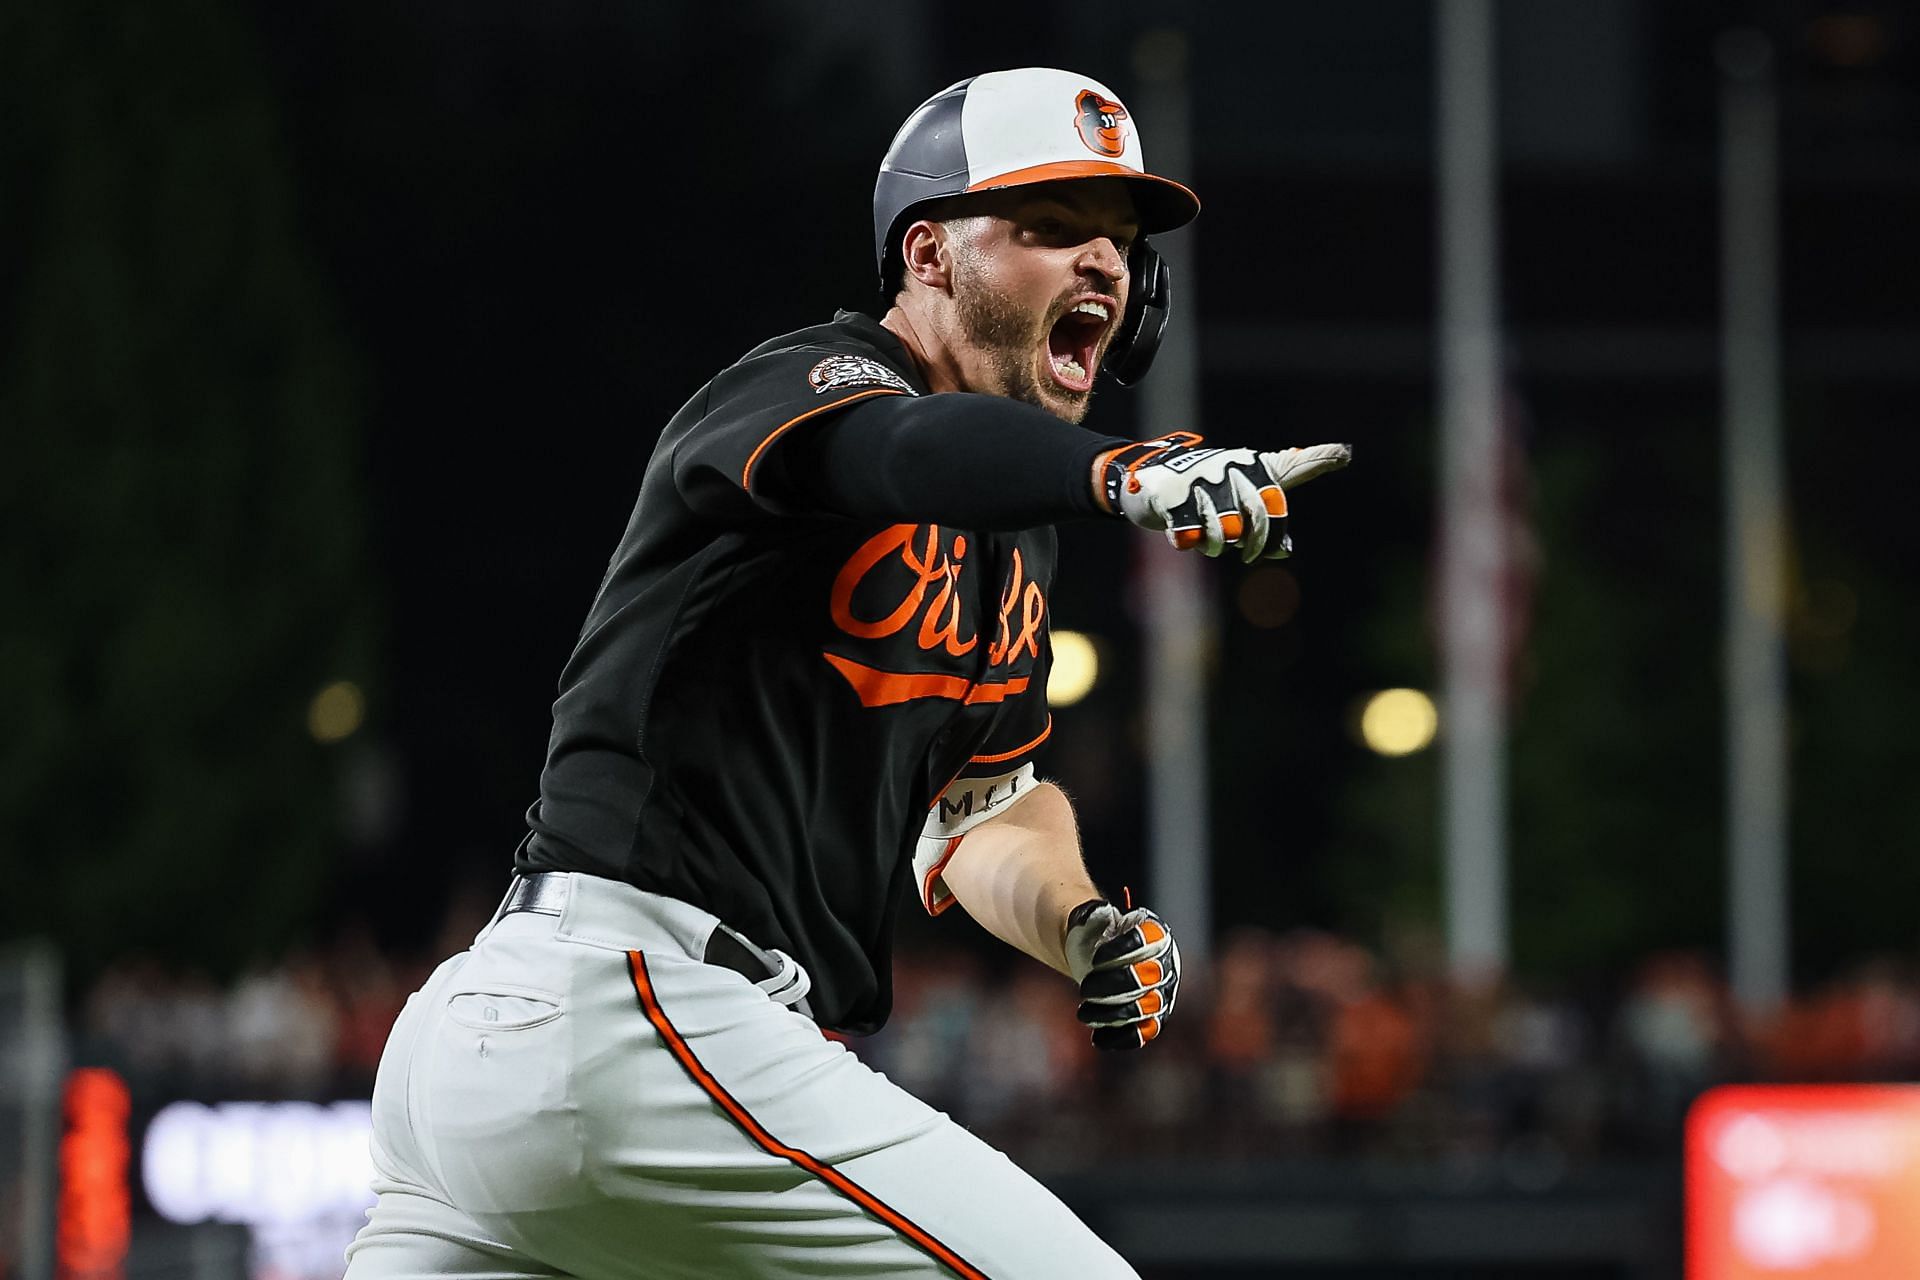 Trey Mancini has been traded from the Baltimore Orioles in a three-way deal.